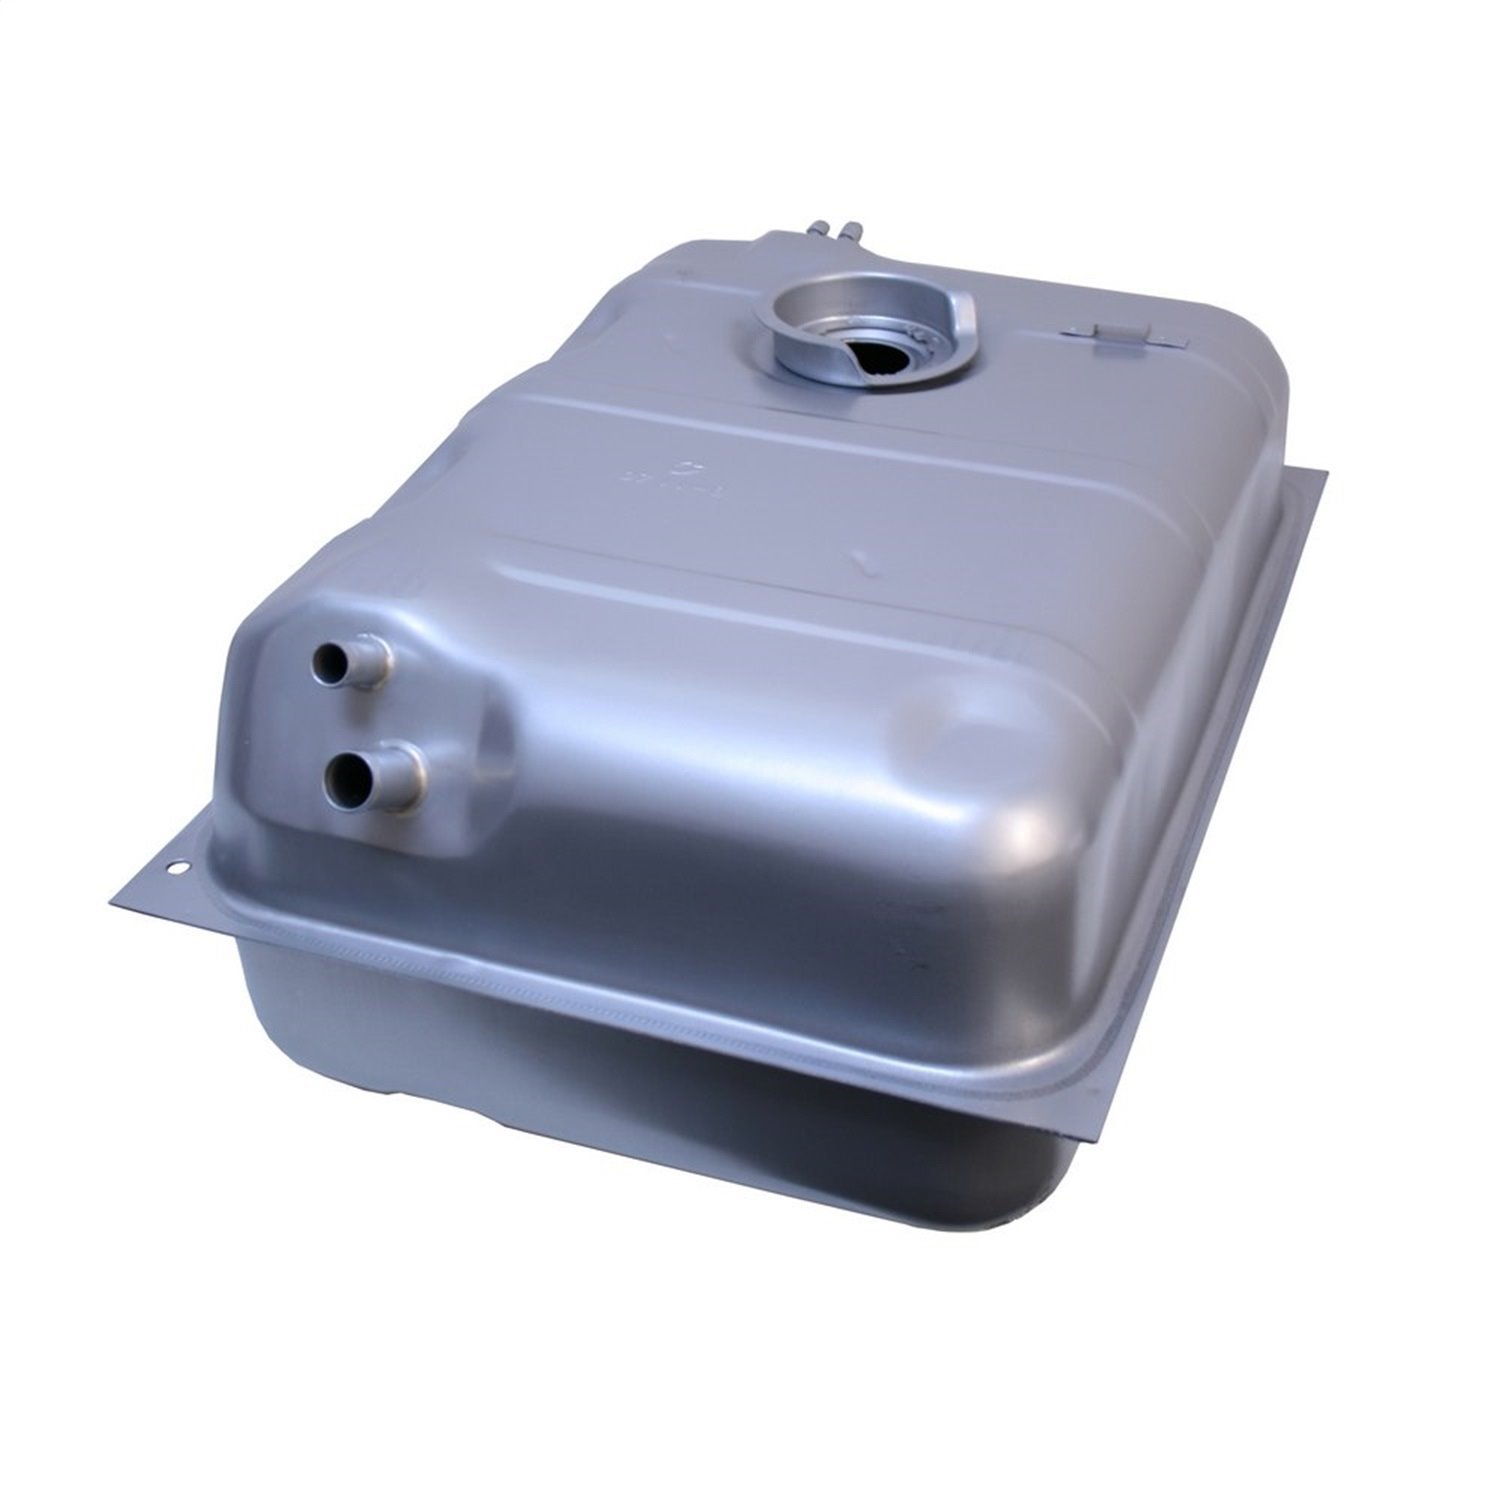 This replacement 15-gallon steel Gas/Fuel tank assembly from